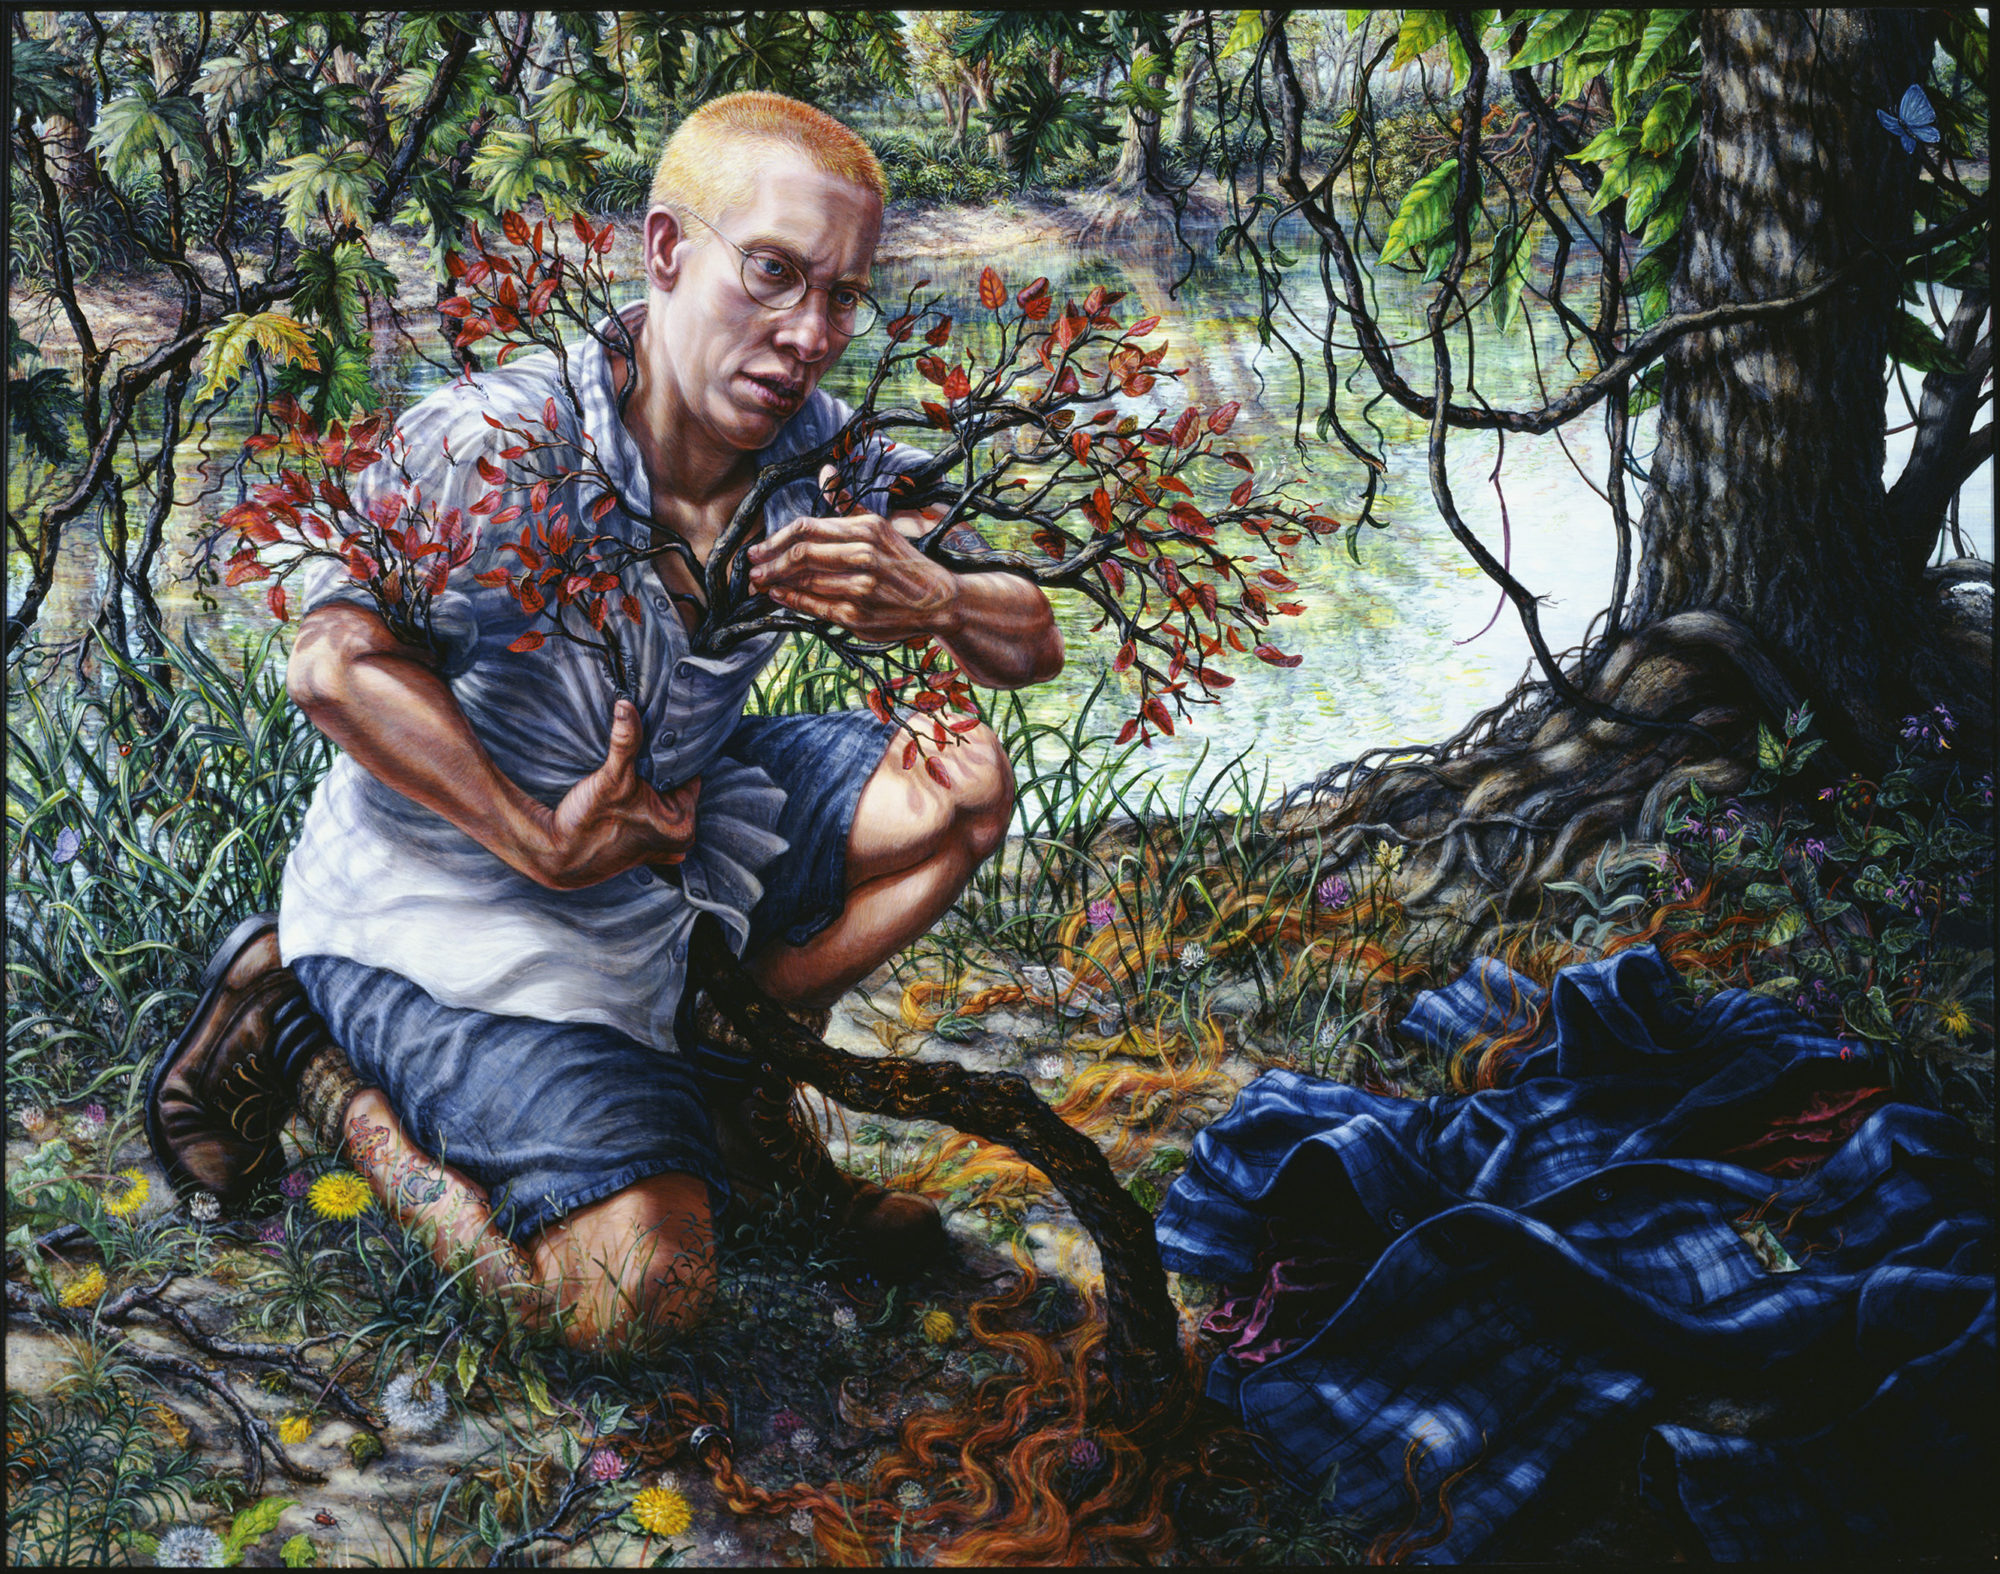 painting of man kneeling over in jungle setting with tree branches emerging from under his clothes, appear to be growing from his body